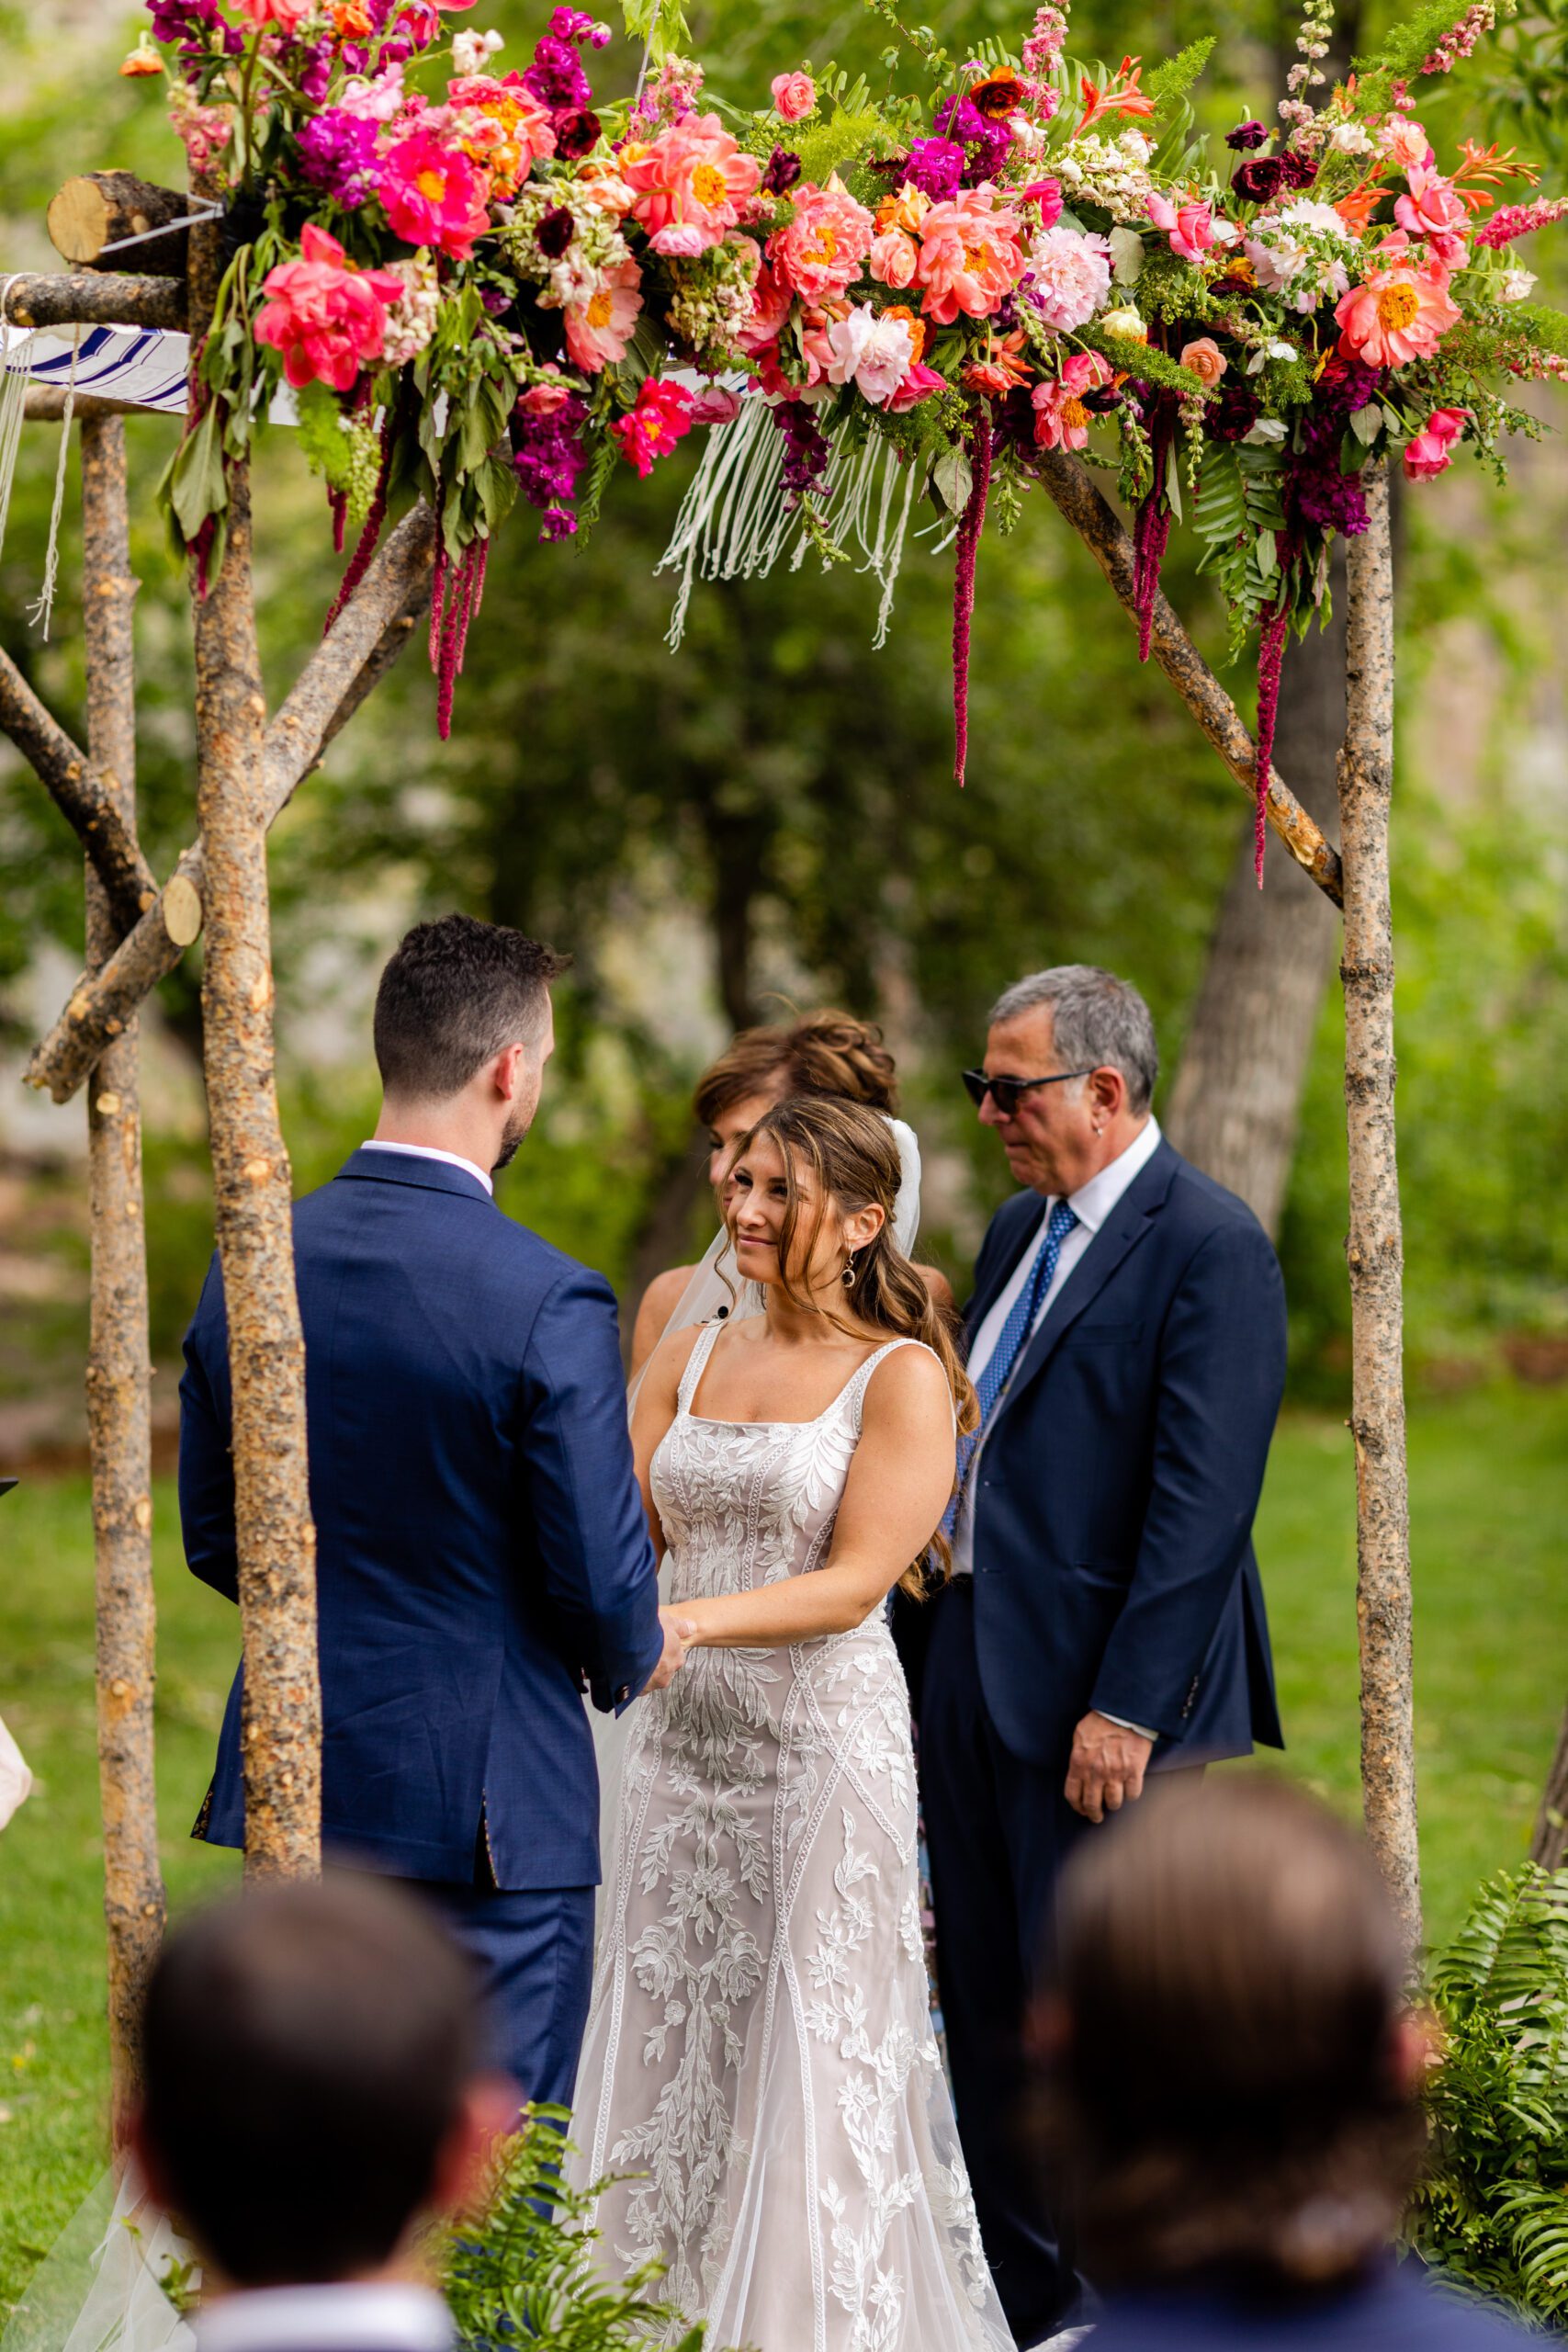 sustainable colorado wedding, wedding chuppah, floral chuppah, spring chuppah, jewish wedding, martha stewart weddings, BRIDES, green wedding shoes, the knot, Carats and Cake